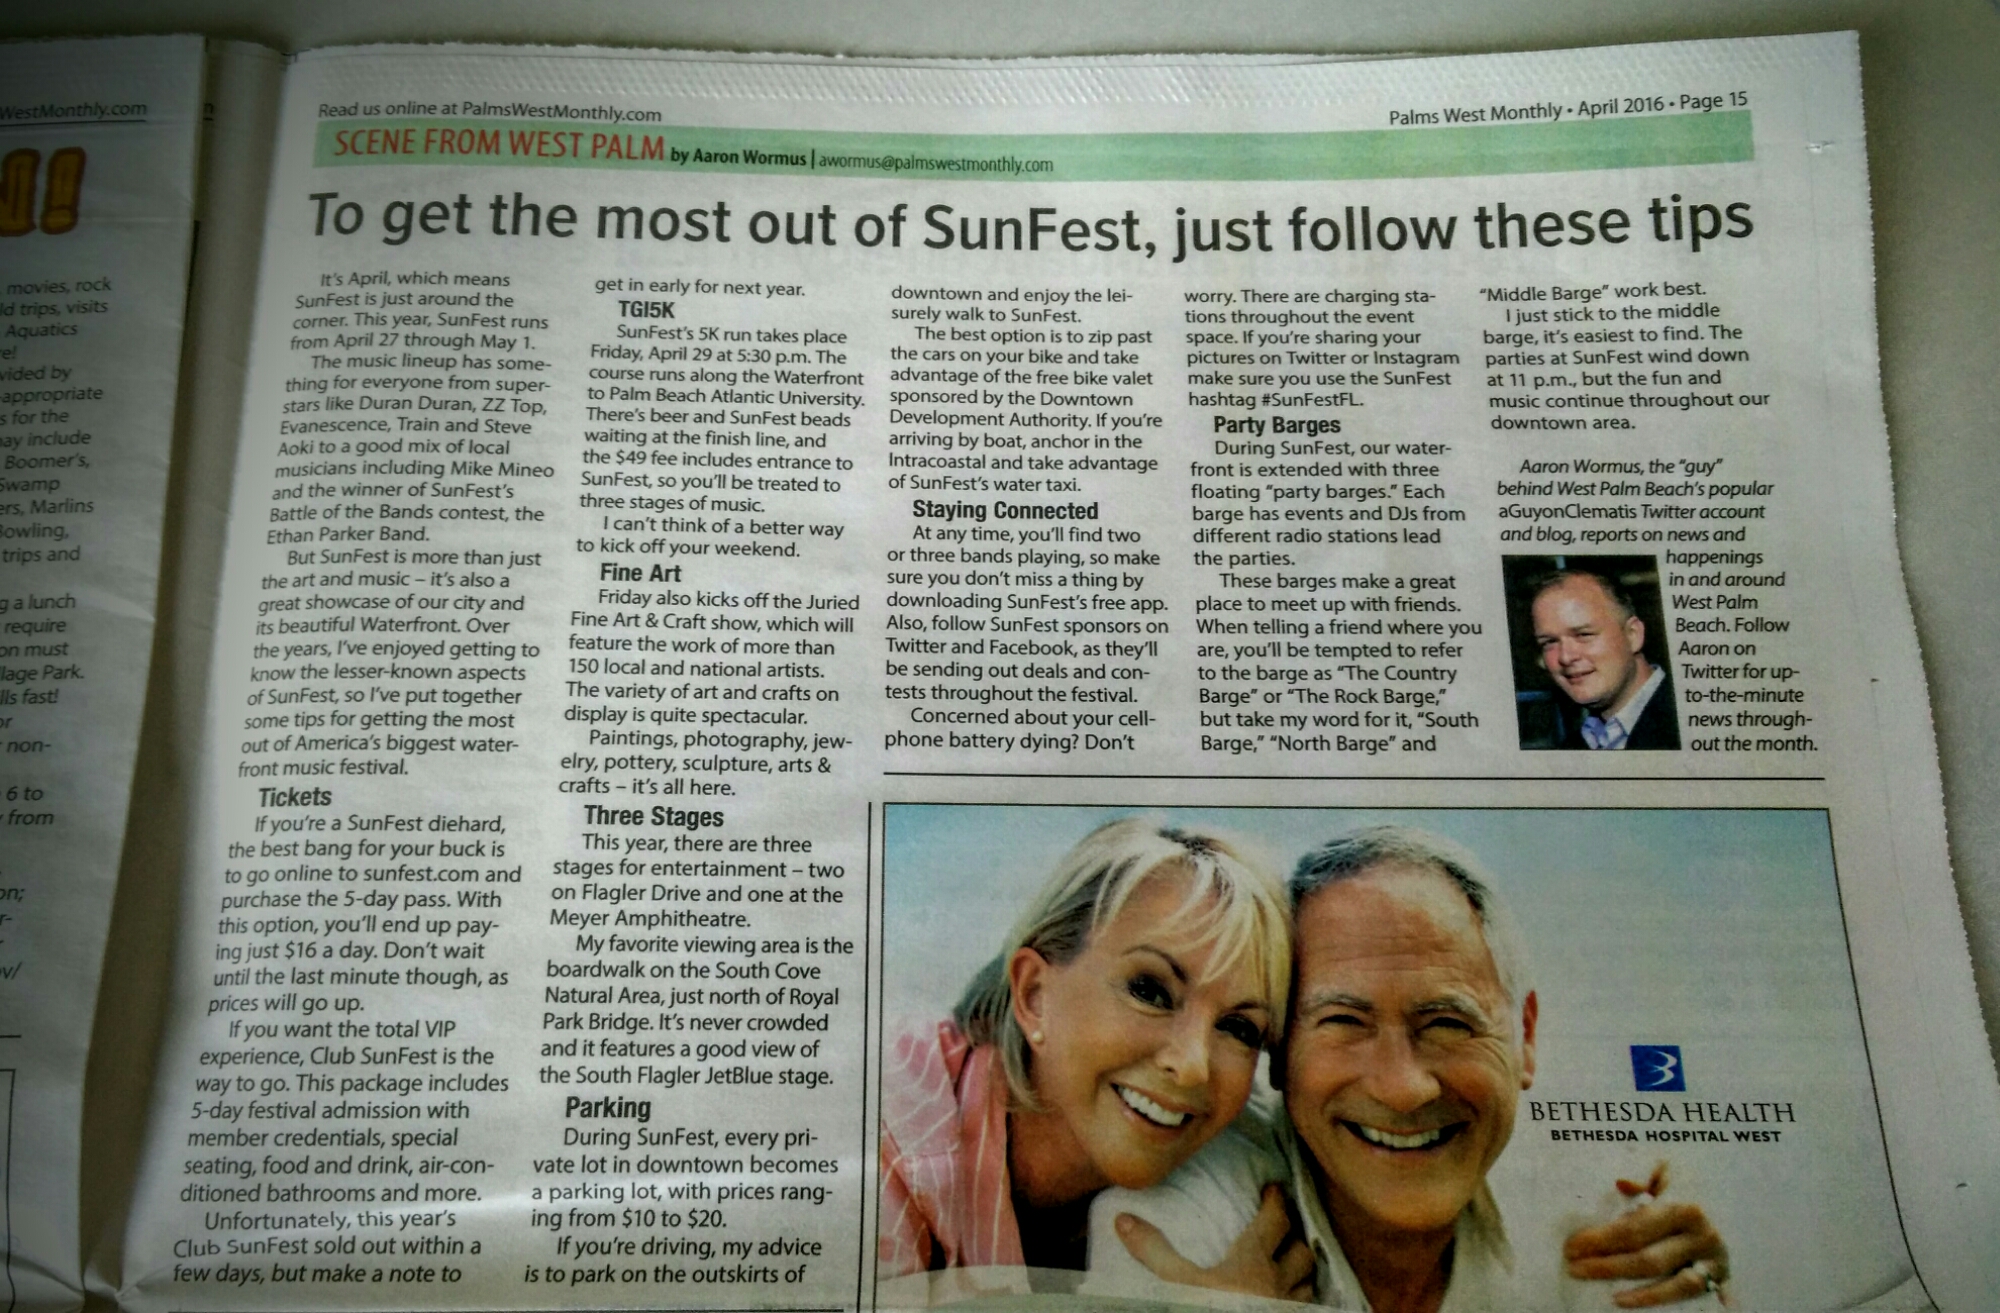 How to get the most out of @SunFestFL in April’s @PWMonthly ...